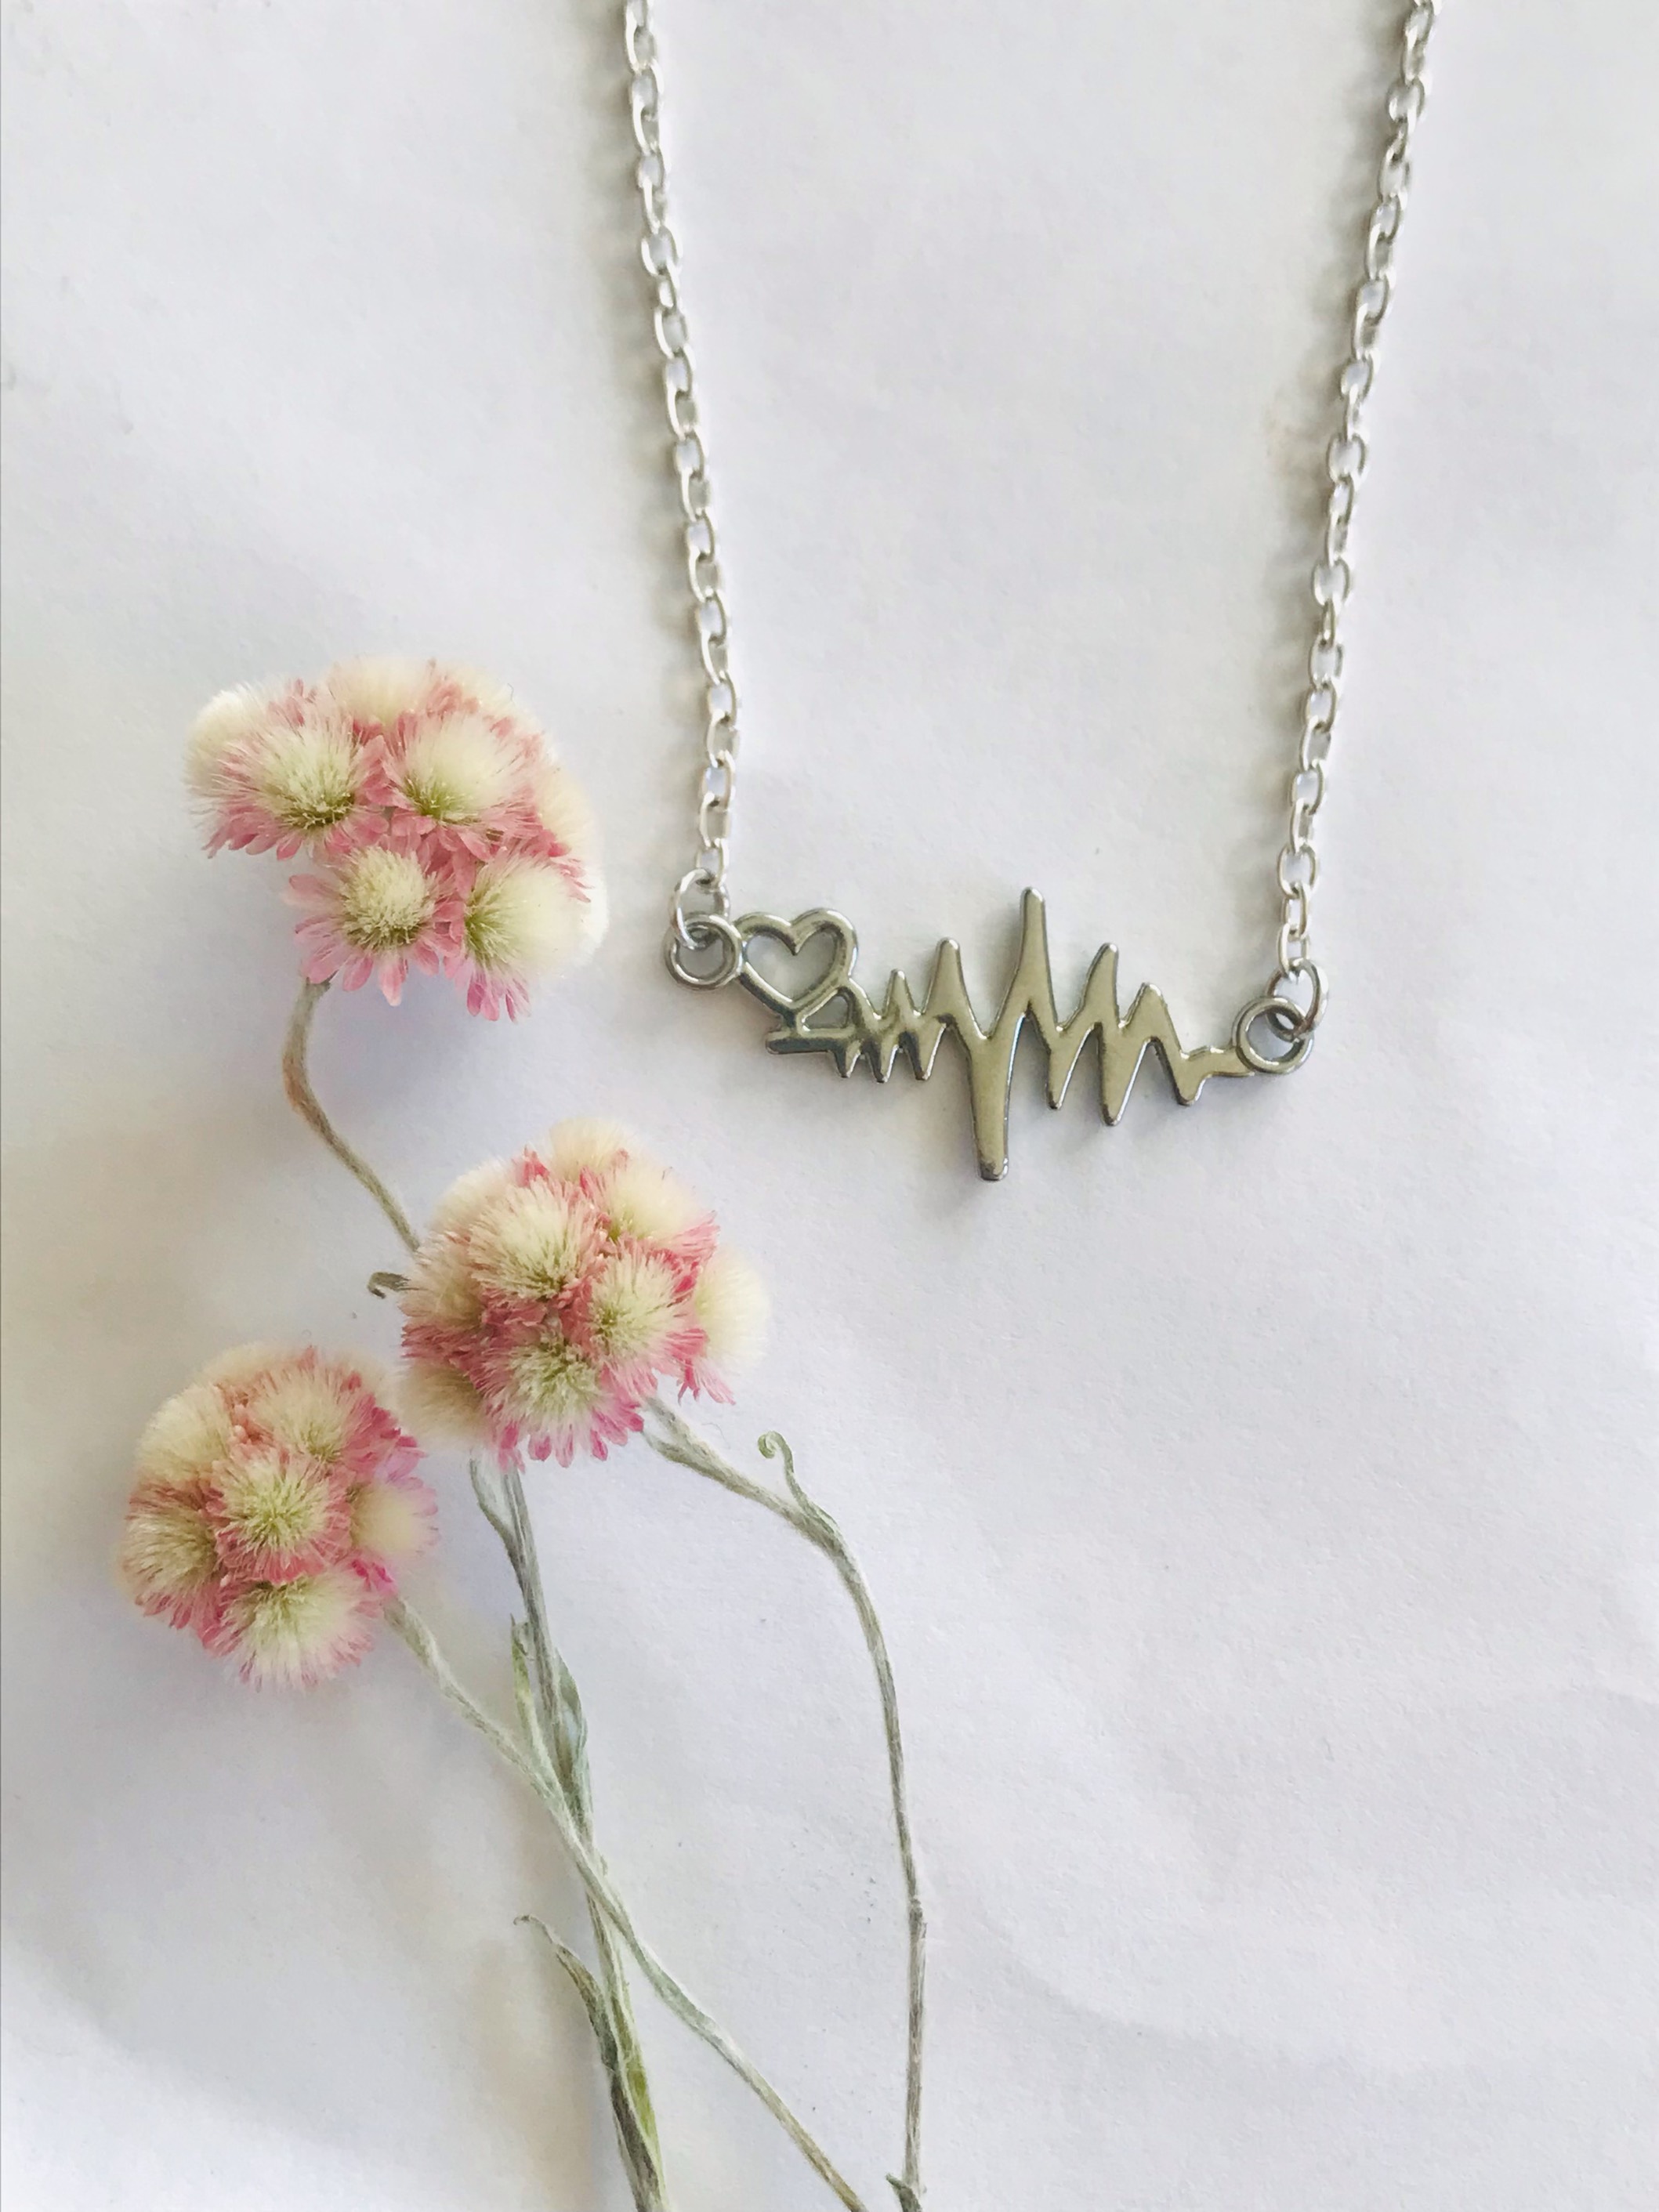 Pro-Life Heartbeat Necklace